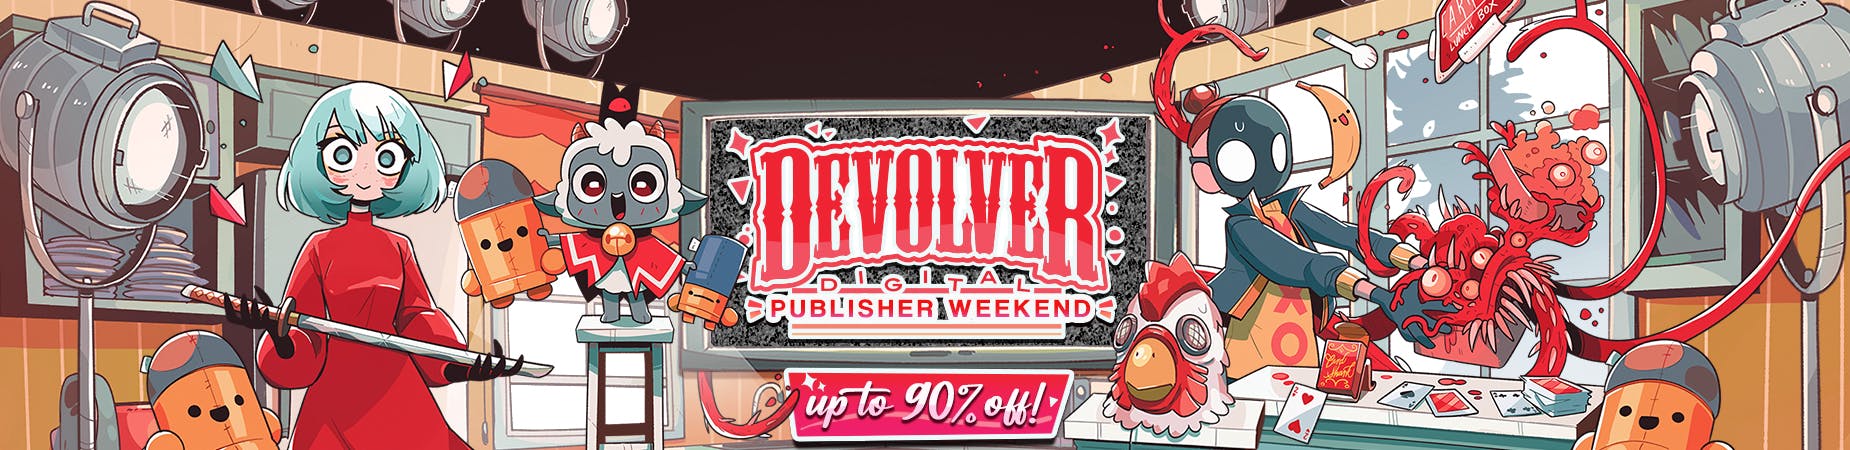 A banner image created for Devolver Digital's Steam Publisher Sale showing a variety of characters from Devolver-published games.